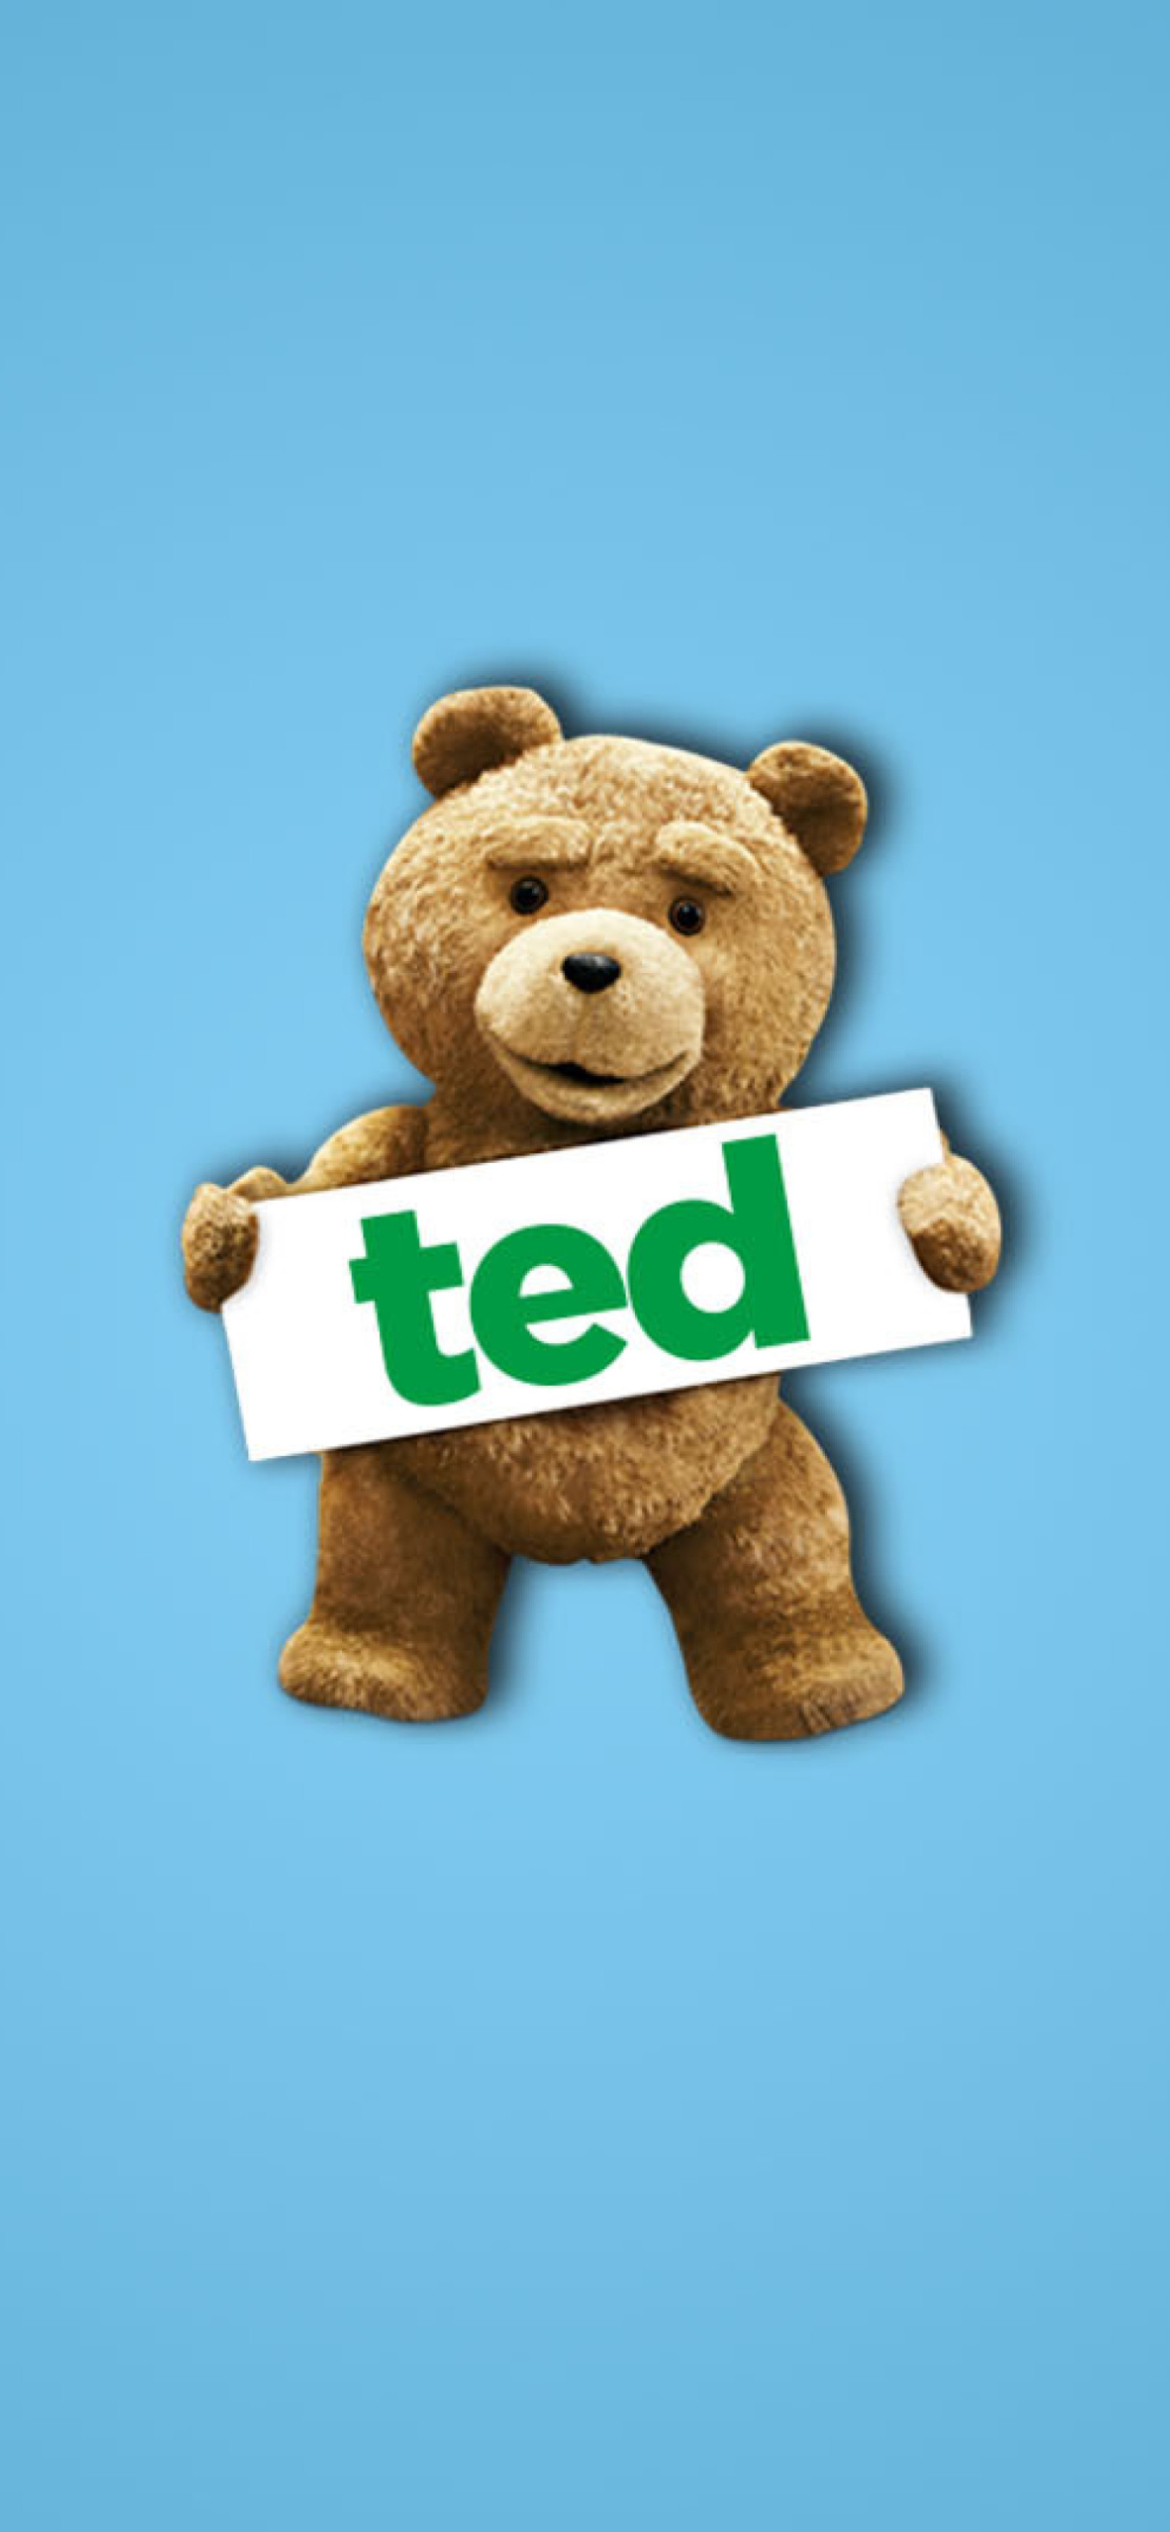 Ted wallpaper 1170x2532